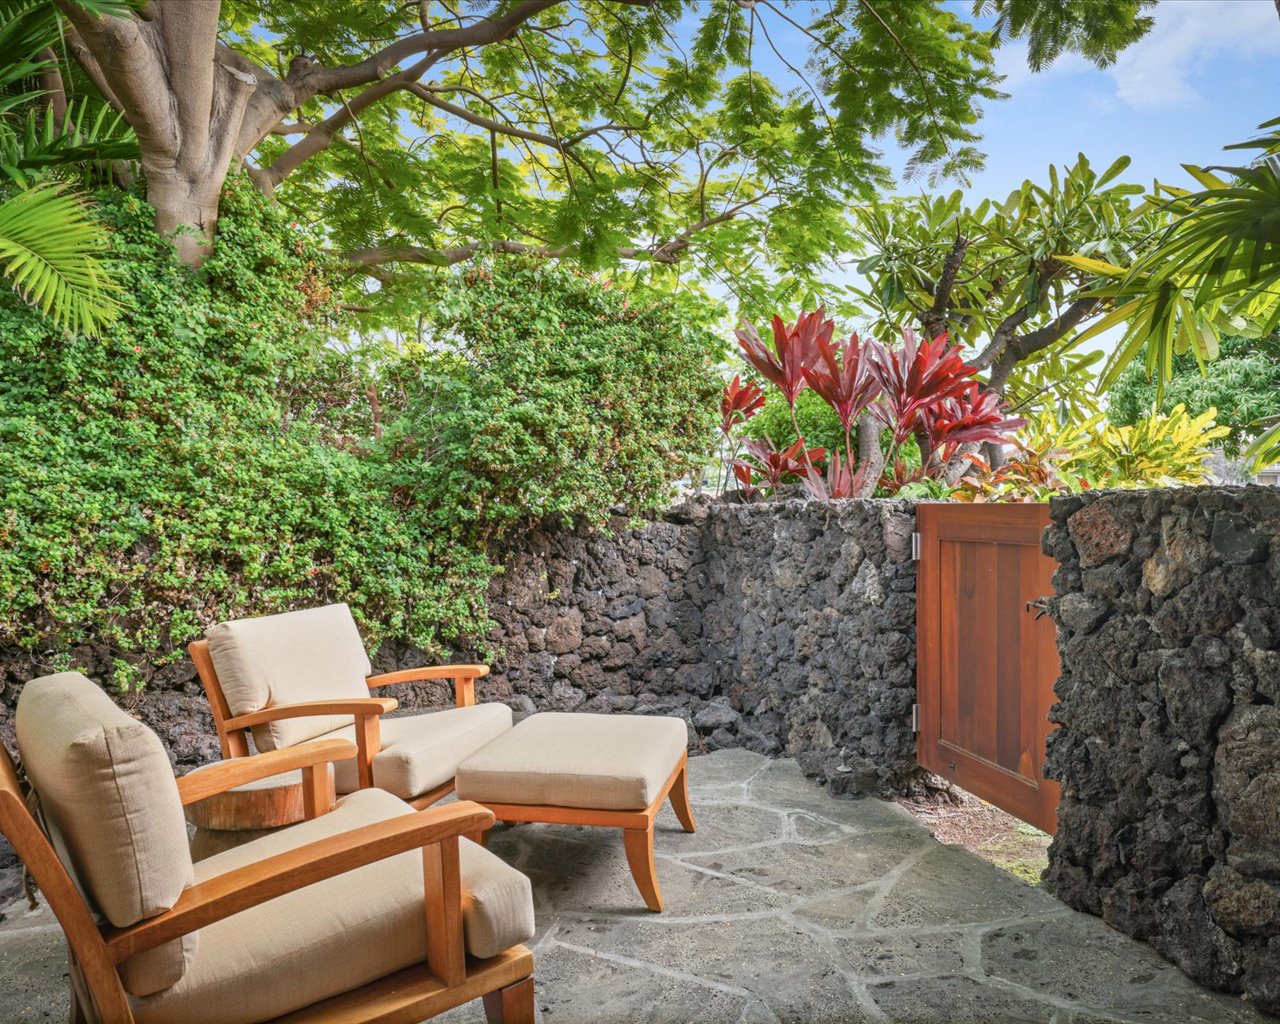 Kailua Kona Vacation Rentals, 3BD Pakui Street (131) Estate Home at Four Seasons Resort at Hualalai - Reverse view of the private lanai with access to the front of the home